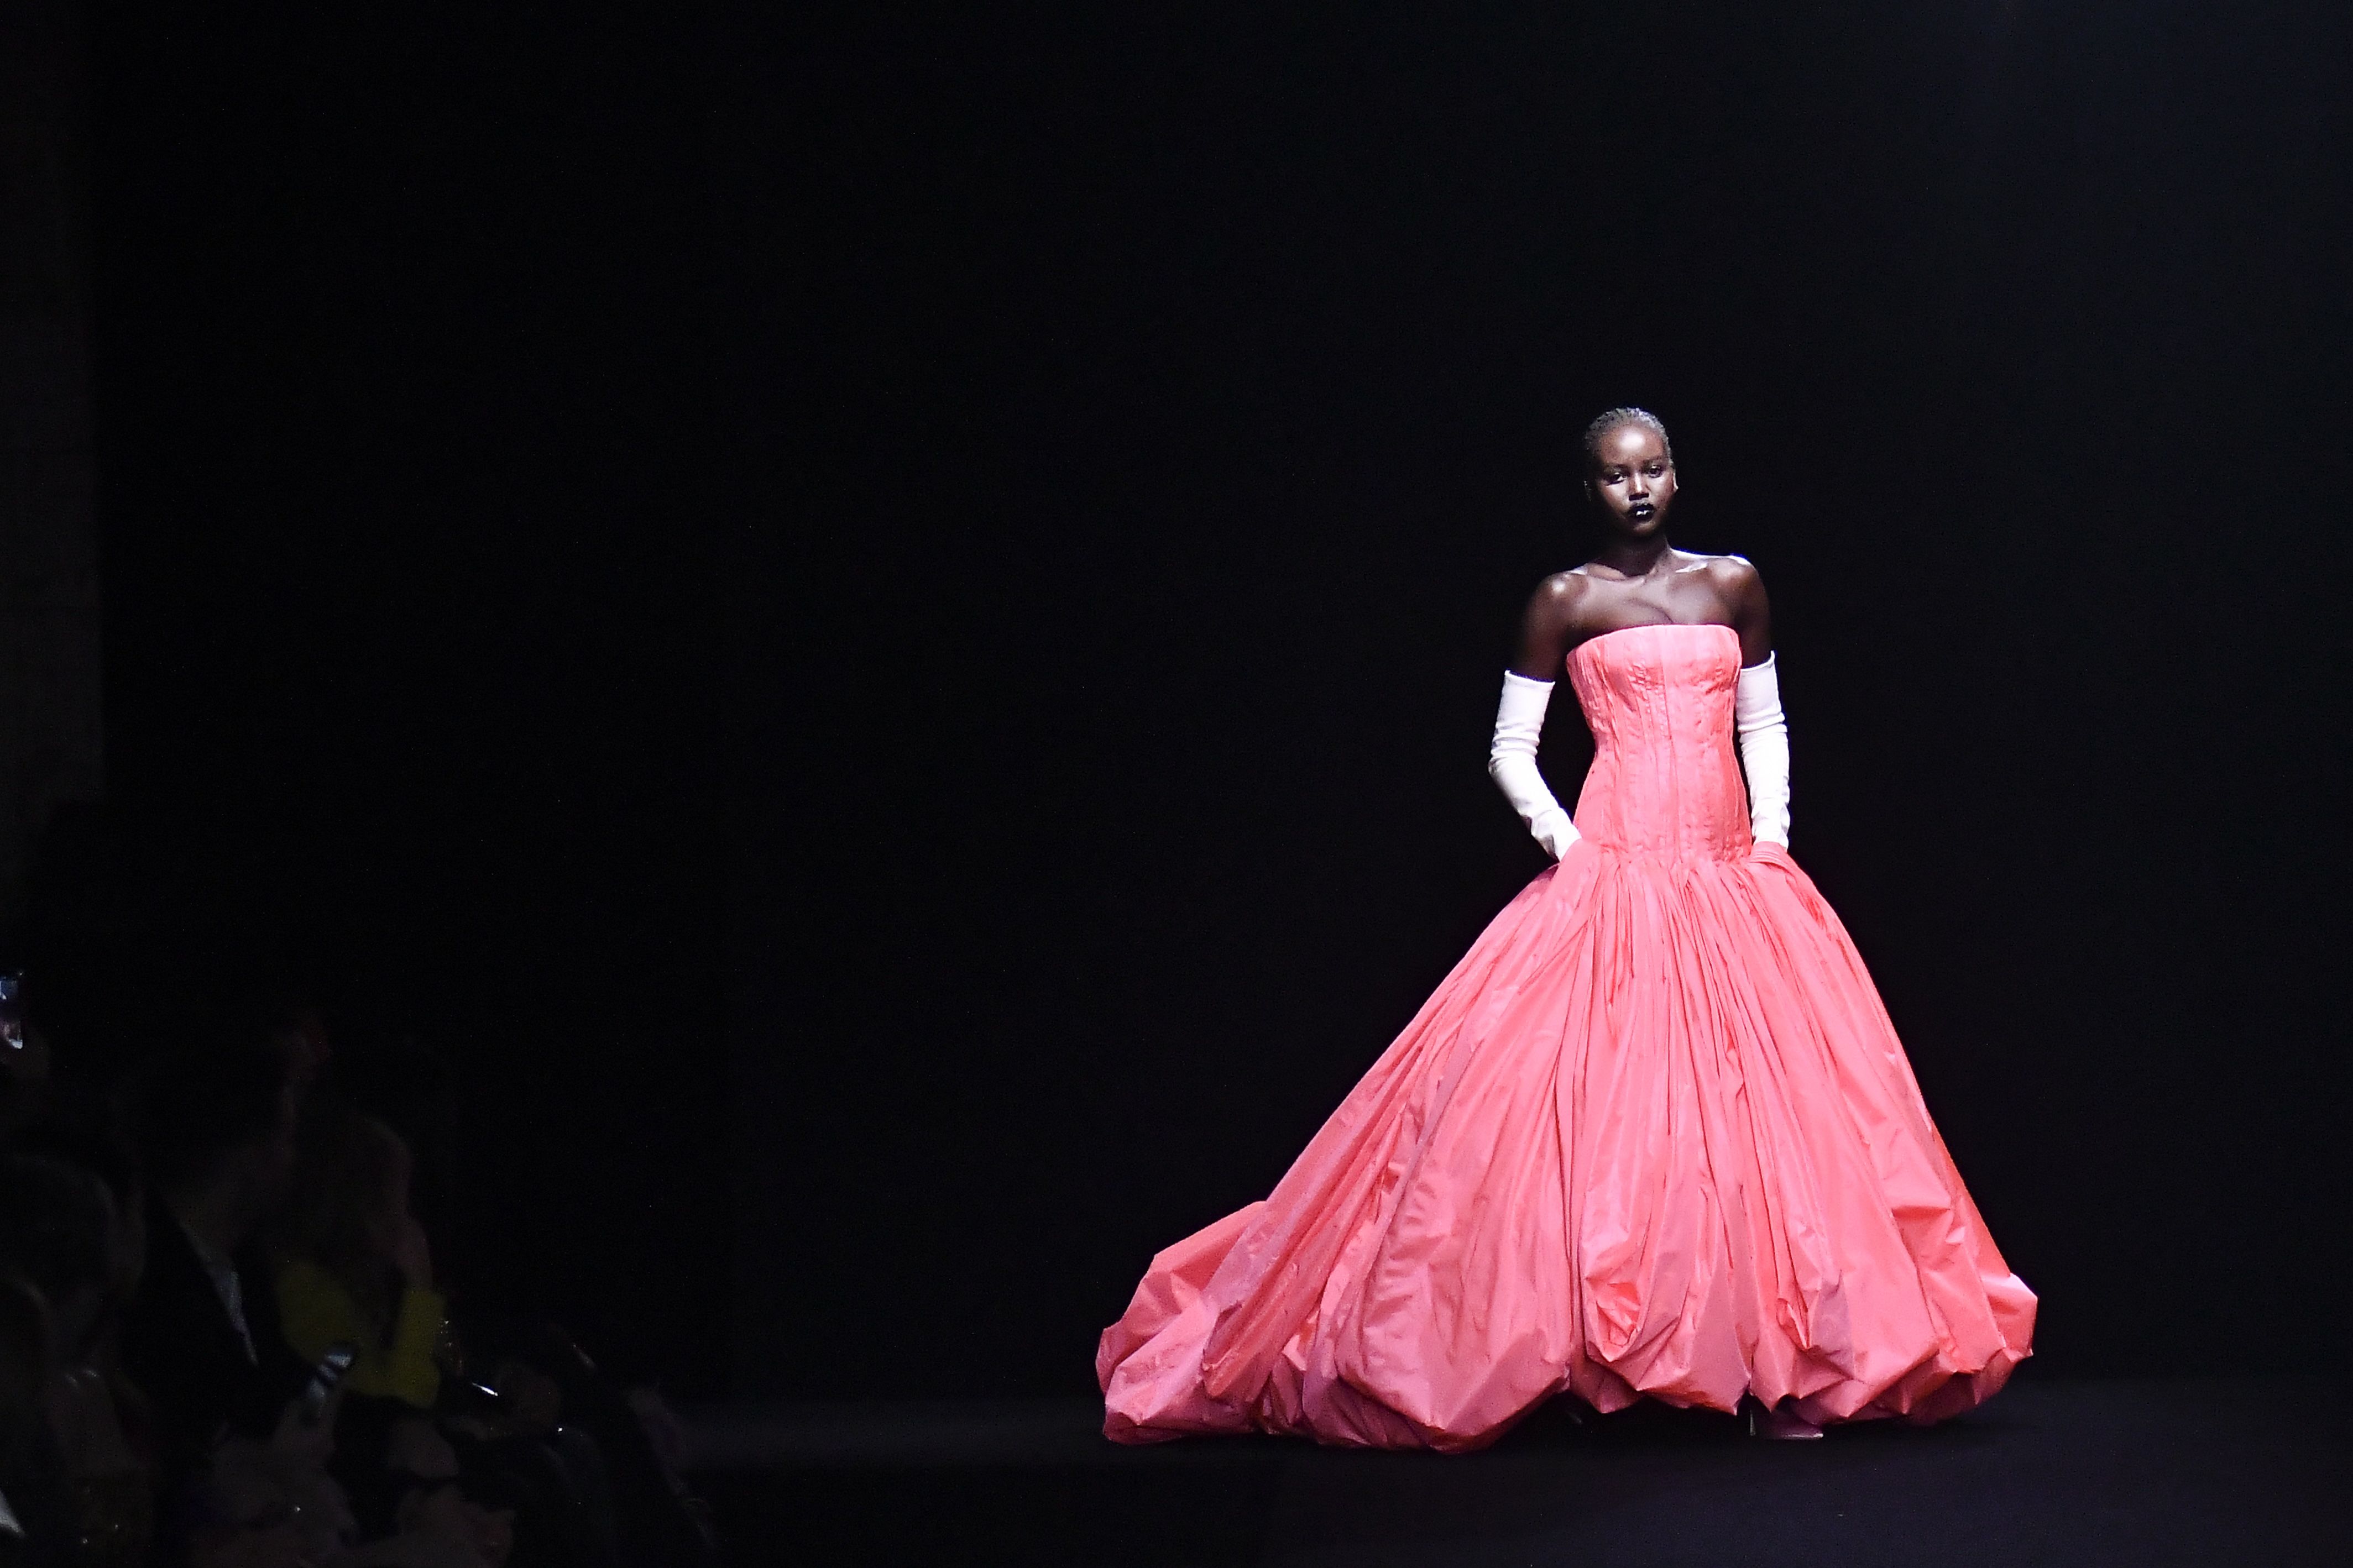 First Look: An Opulent Decade of Dior Haute Couture